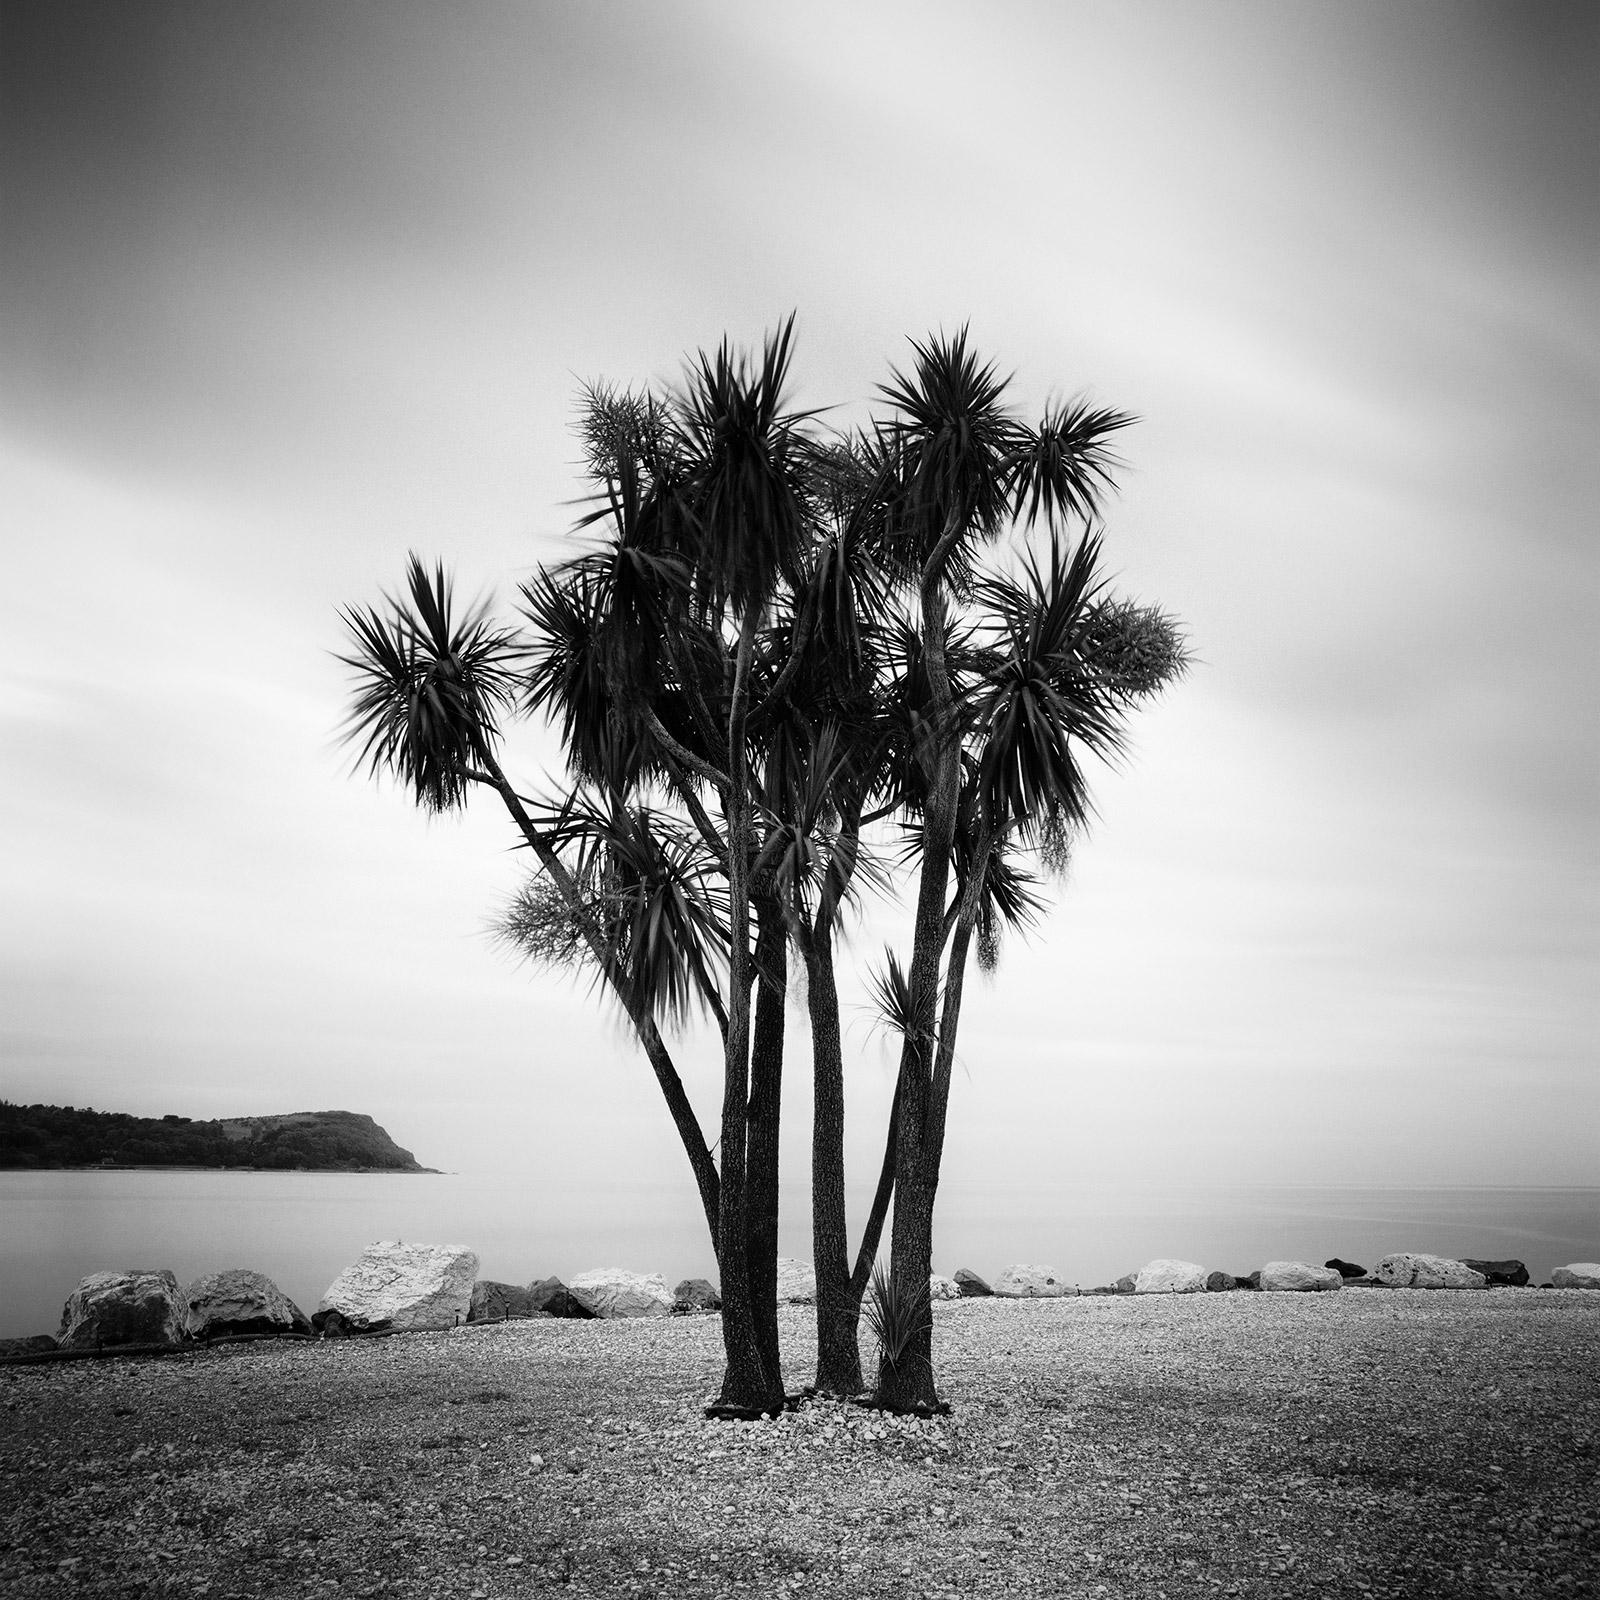 Gerald Berghammer Black and White Photograph - Caribbean Feeling, Palm Trees, Ireland, black and white landscape photography